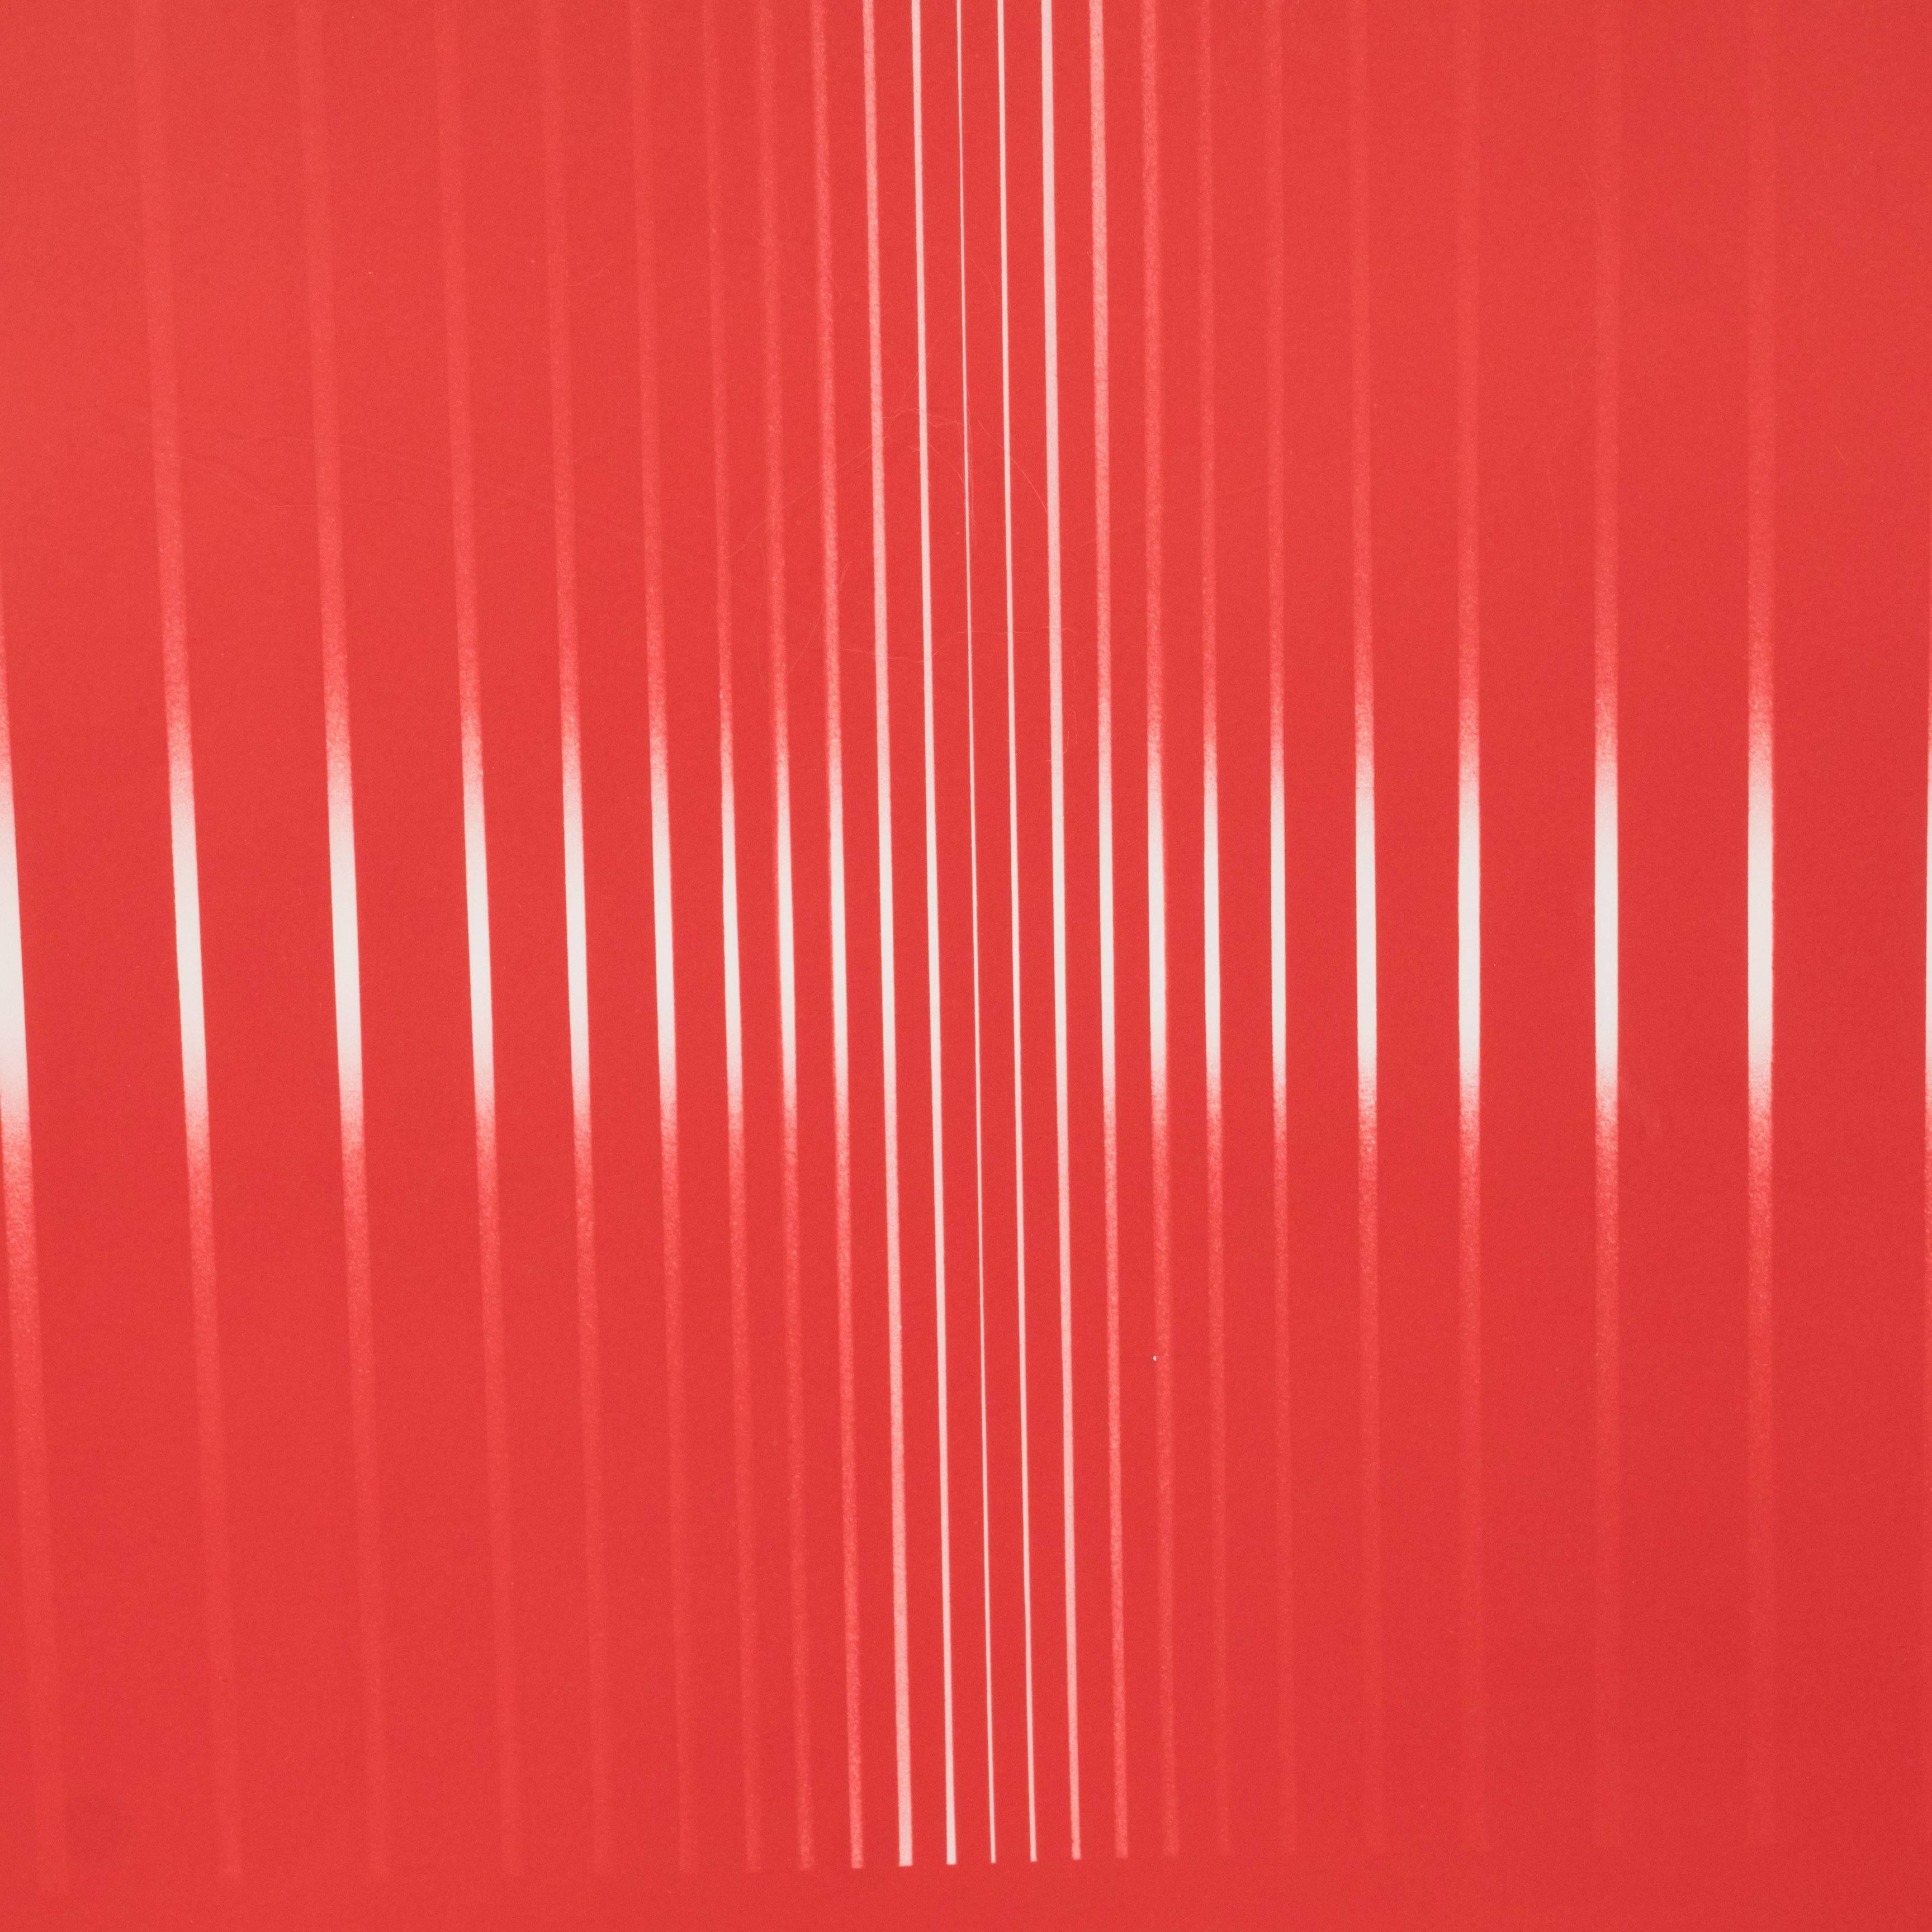 Dynamic Mid-Century Modern Op-Art Signed Serigraph by Ennio Finzi in Vibrant Red 2